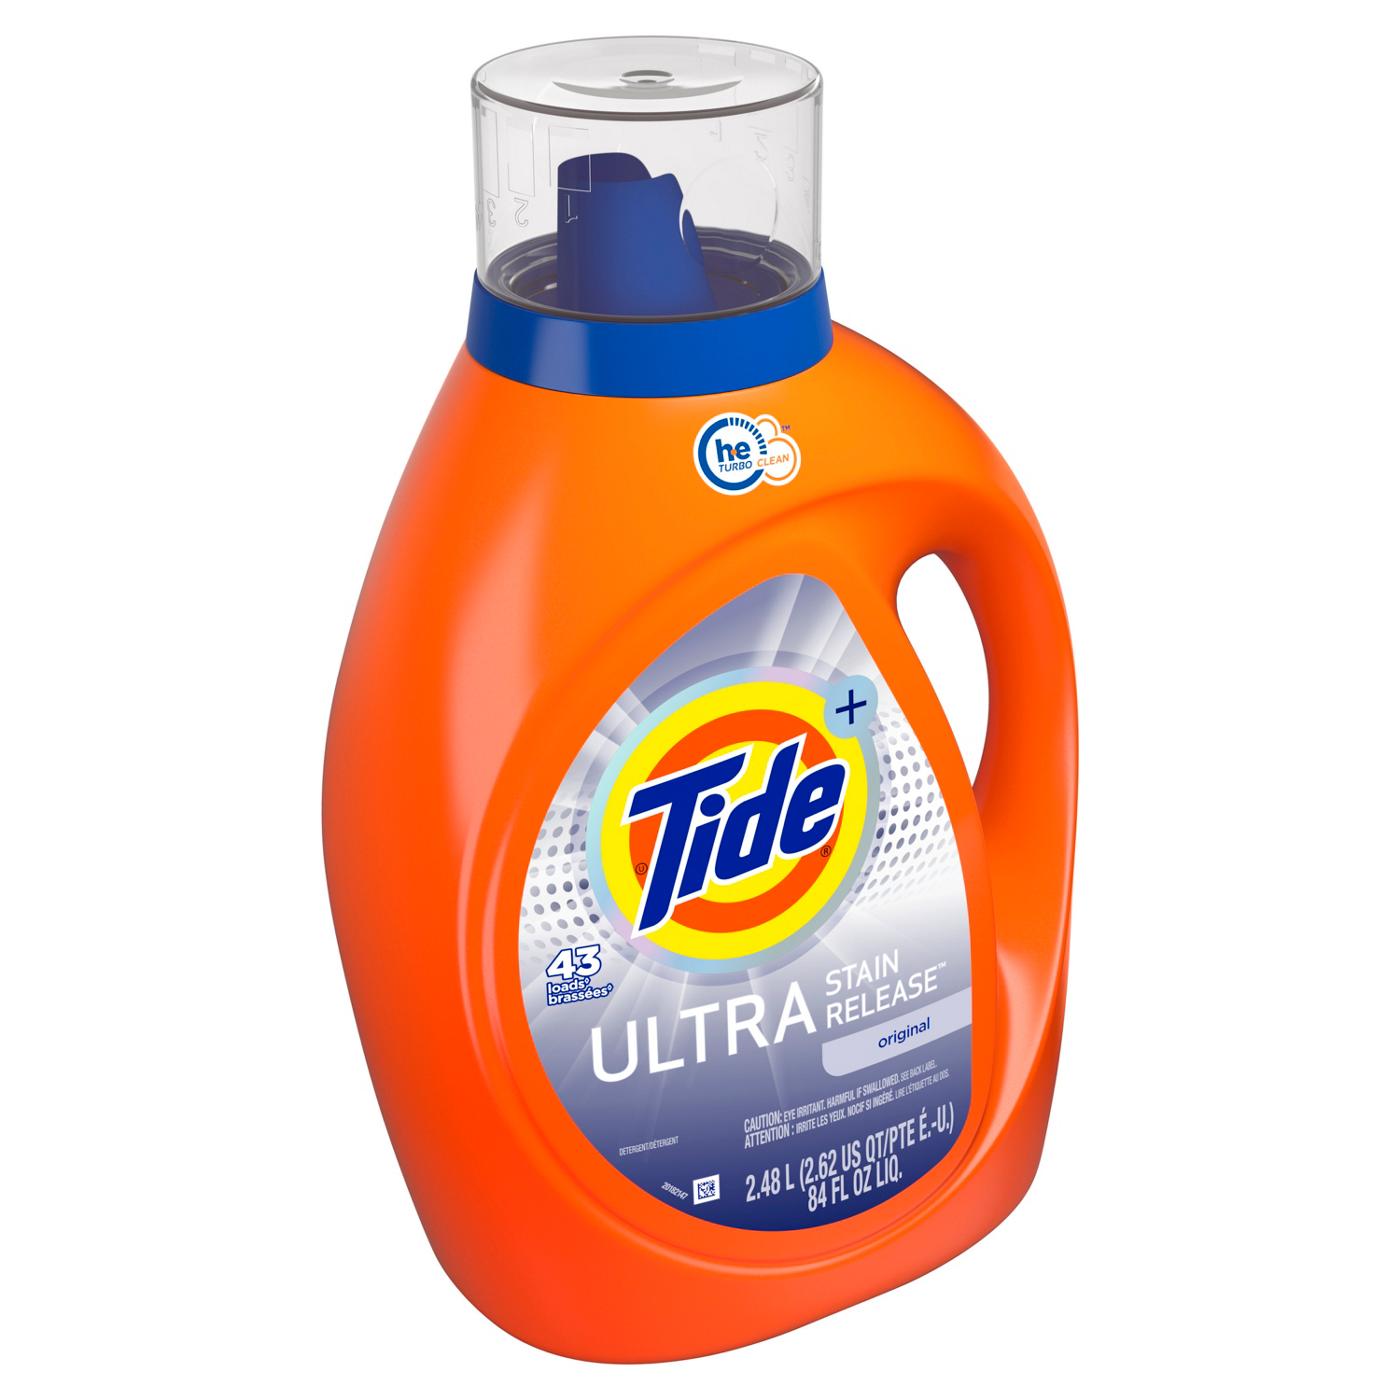 Tide Ultra Stain Release HE Turbo Clean Liquid Laundry Detergent, 43 Loads - Original; image 5 of 6